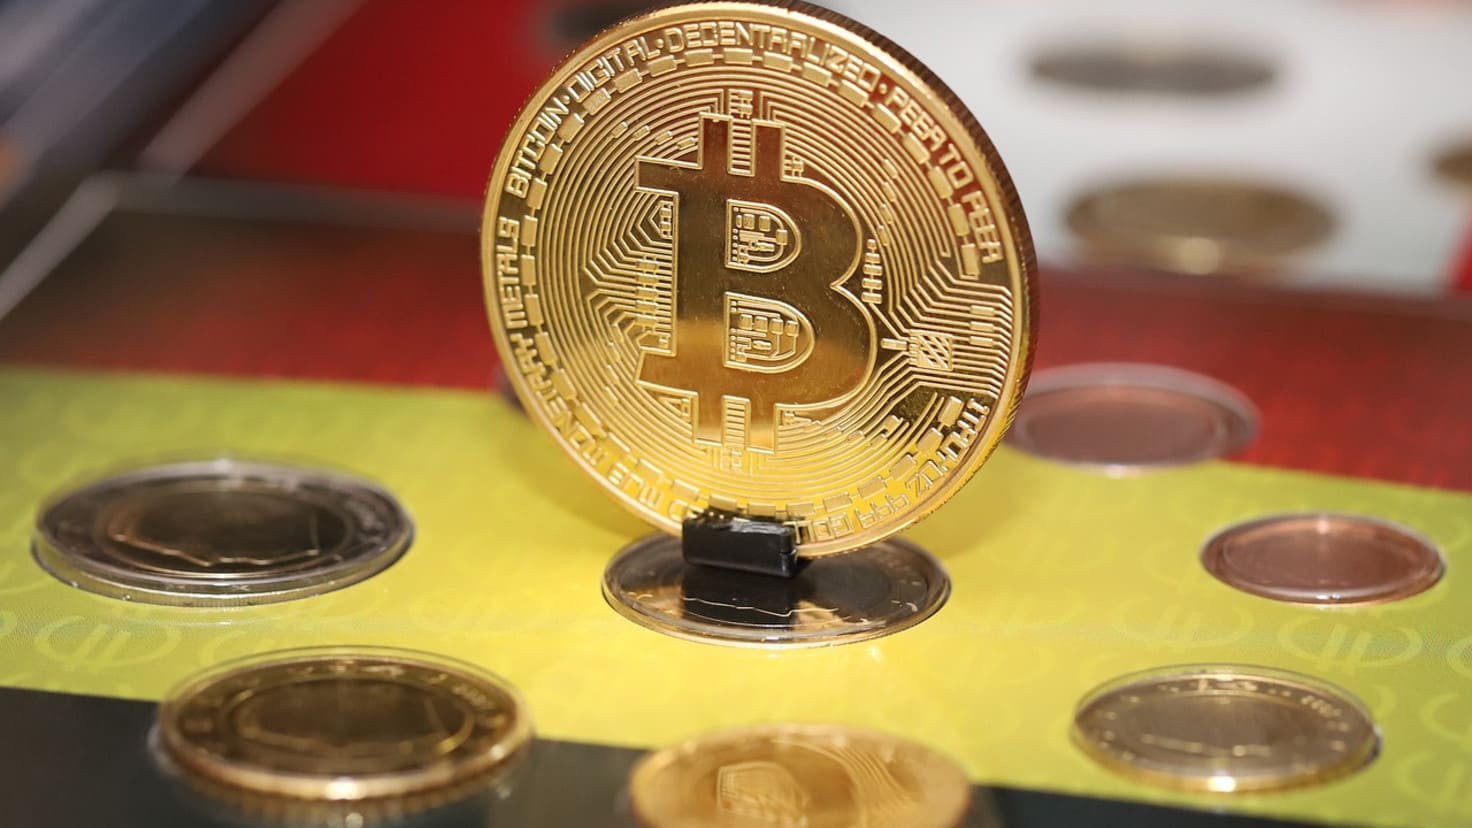 Local Bitcoin Support +1(833)409-0301 Phone Number